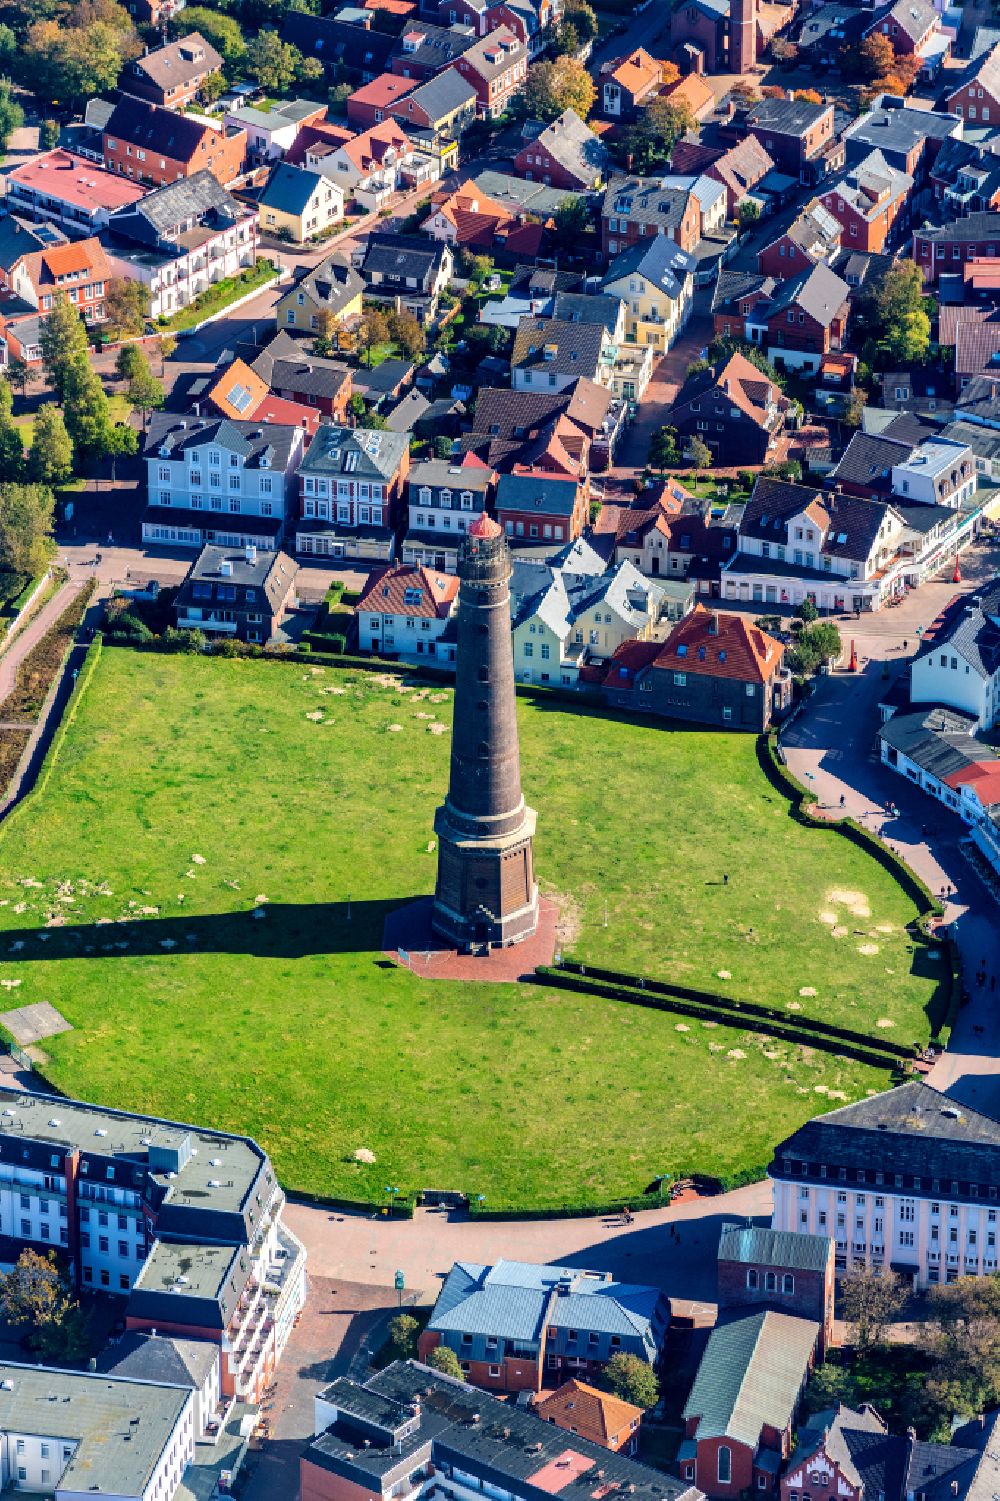 Aerial image Borkum - Lighthouse Neue Leuchtturm as a nautical sign in the coastal area of the North Sea as well as a transmission mast in Borkum in the state of Lower Saxony